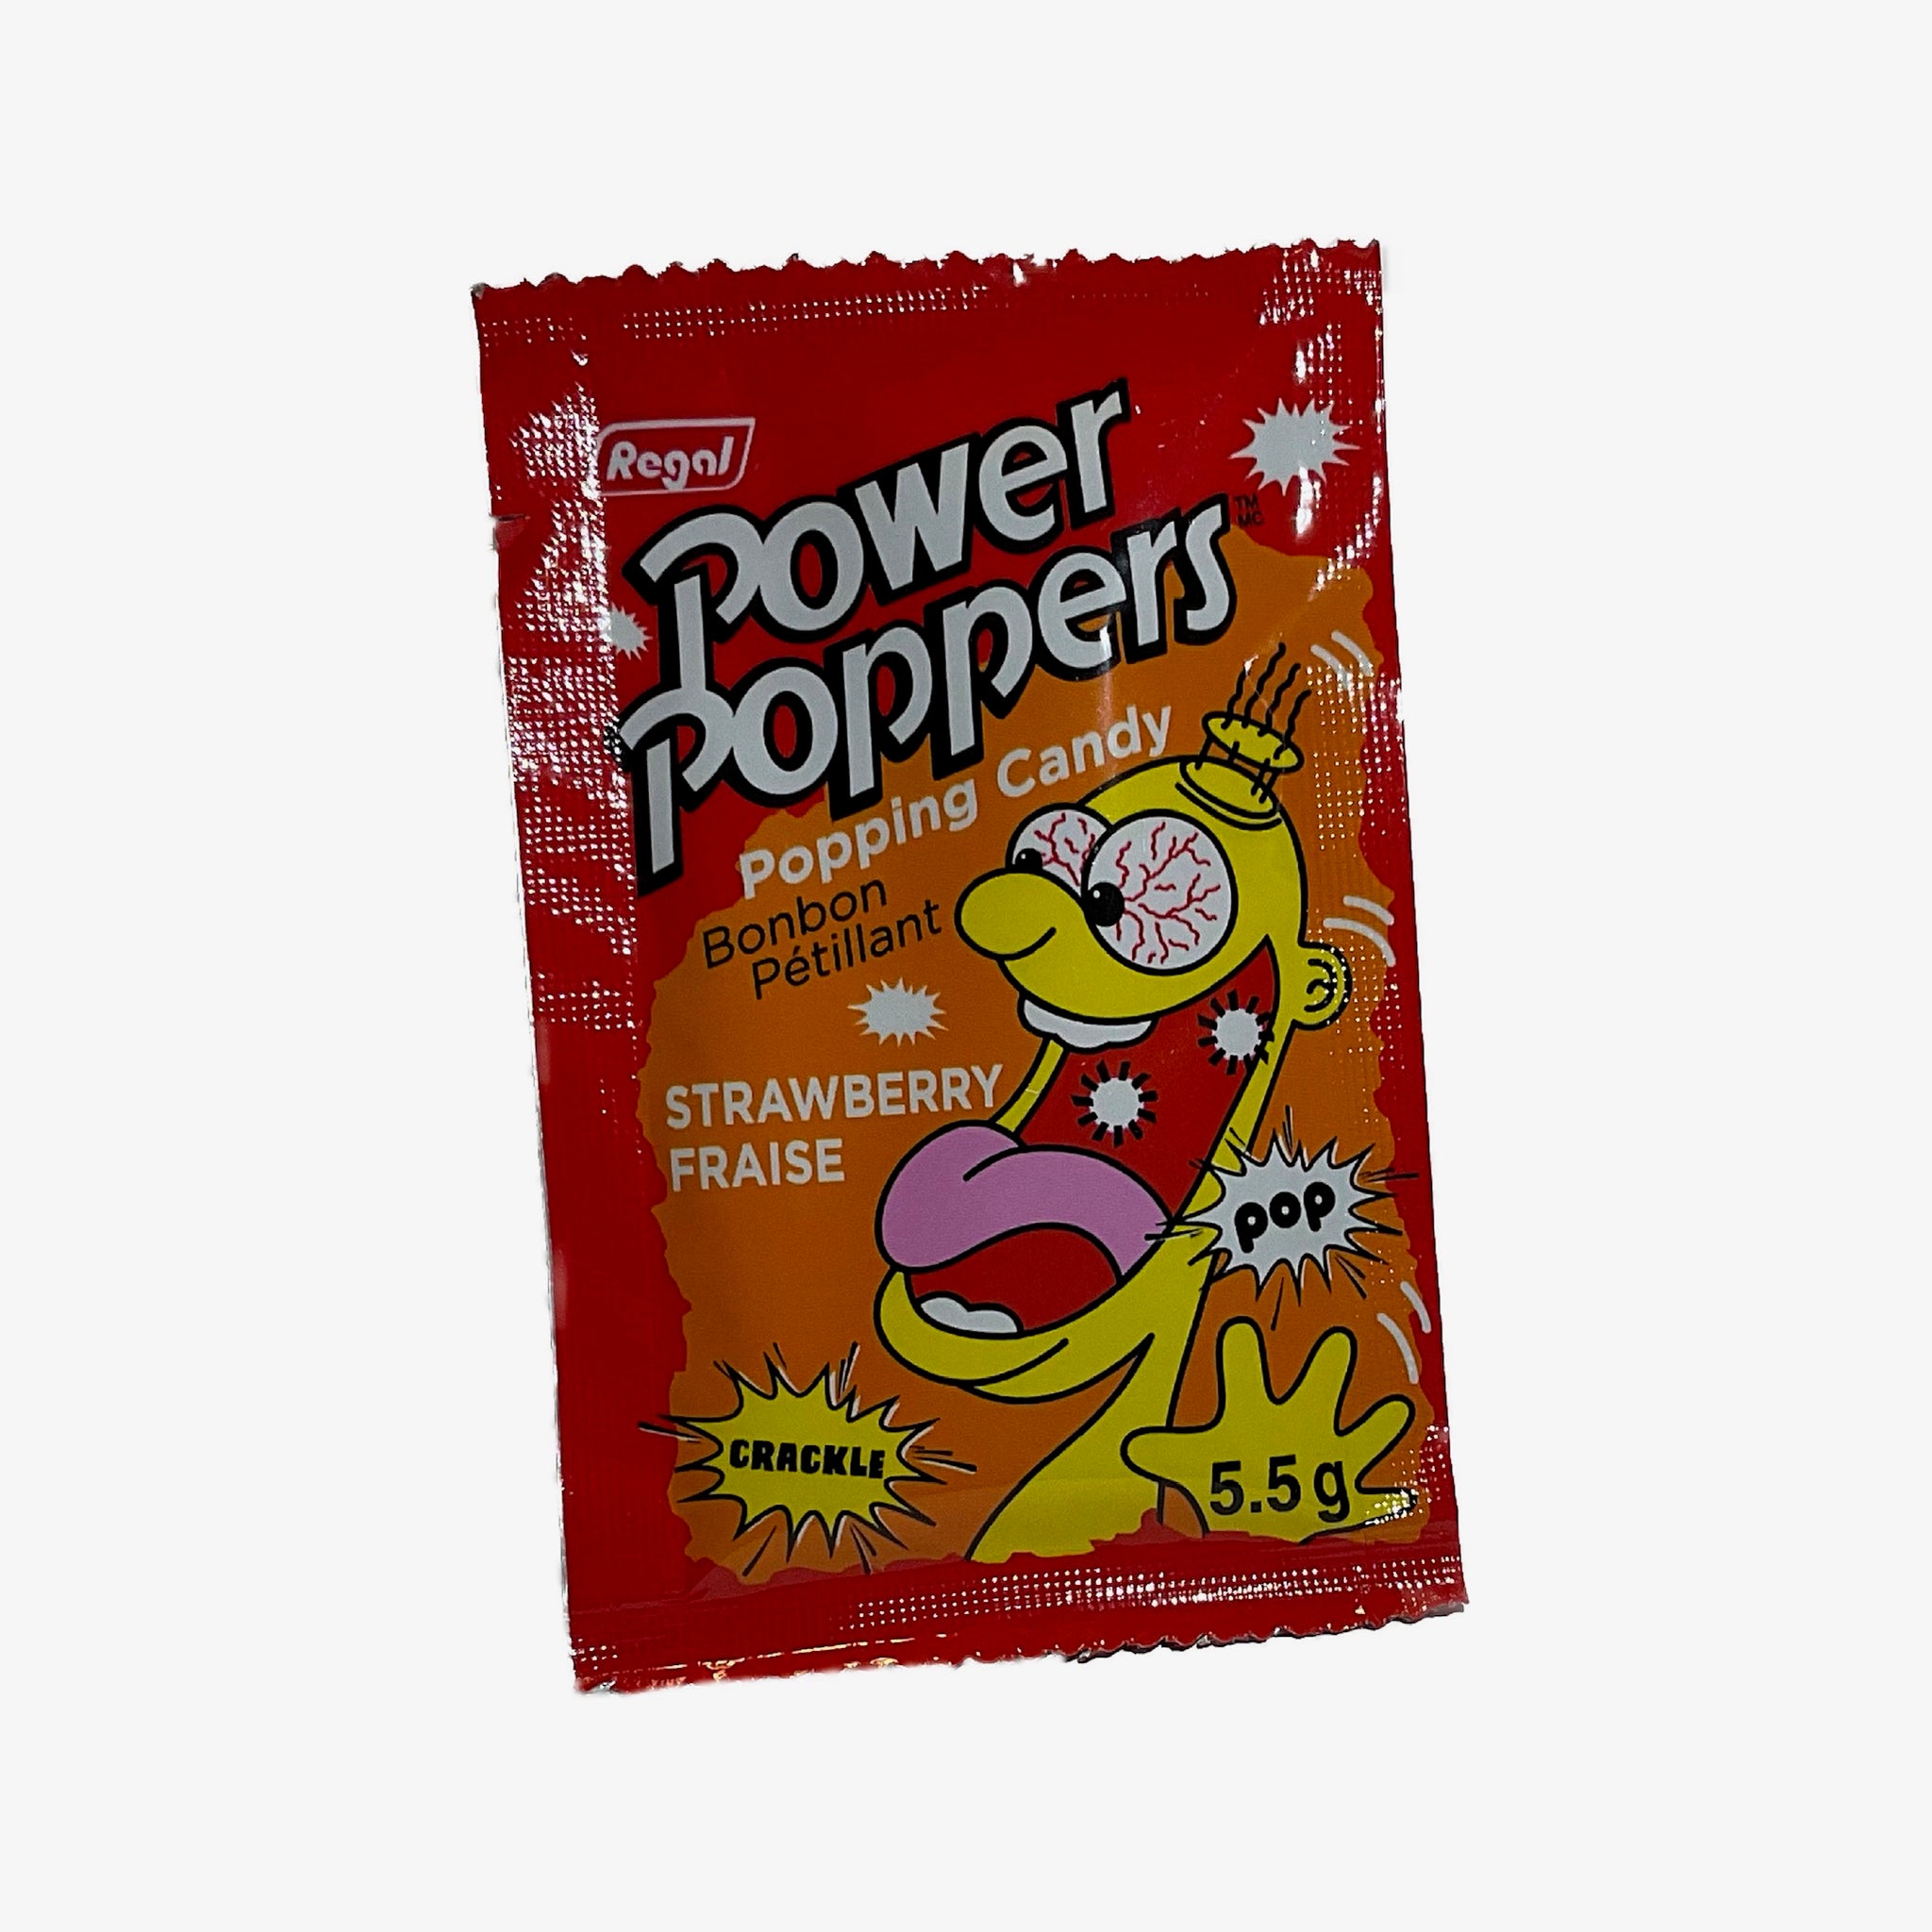 Power Poppers Popping Candy